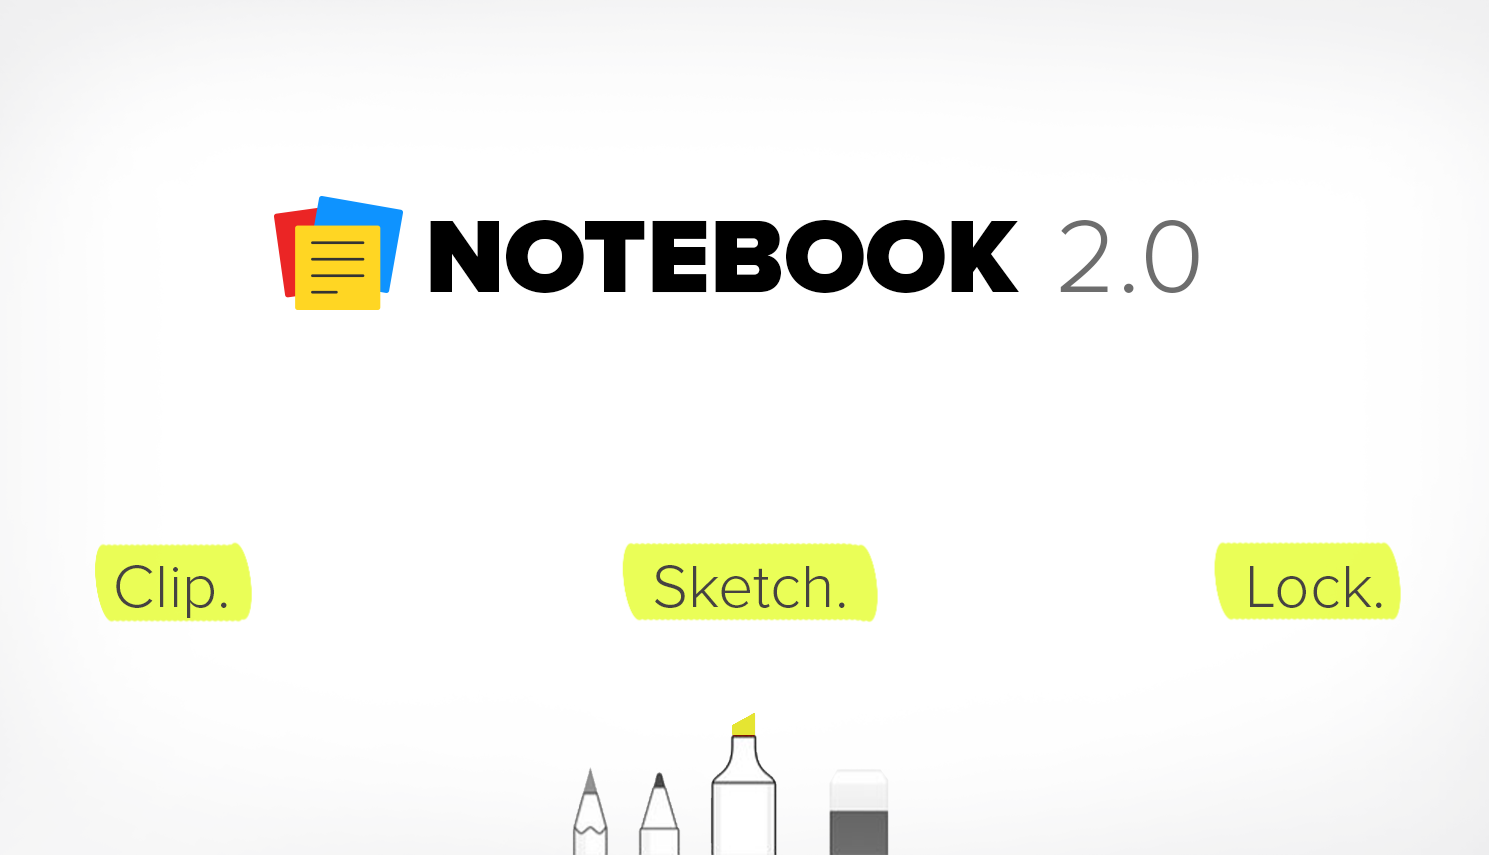 Notebook 2.0: Clip the Web, Sketch Ideas, Lock Your Notes